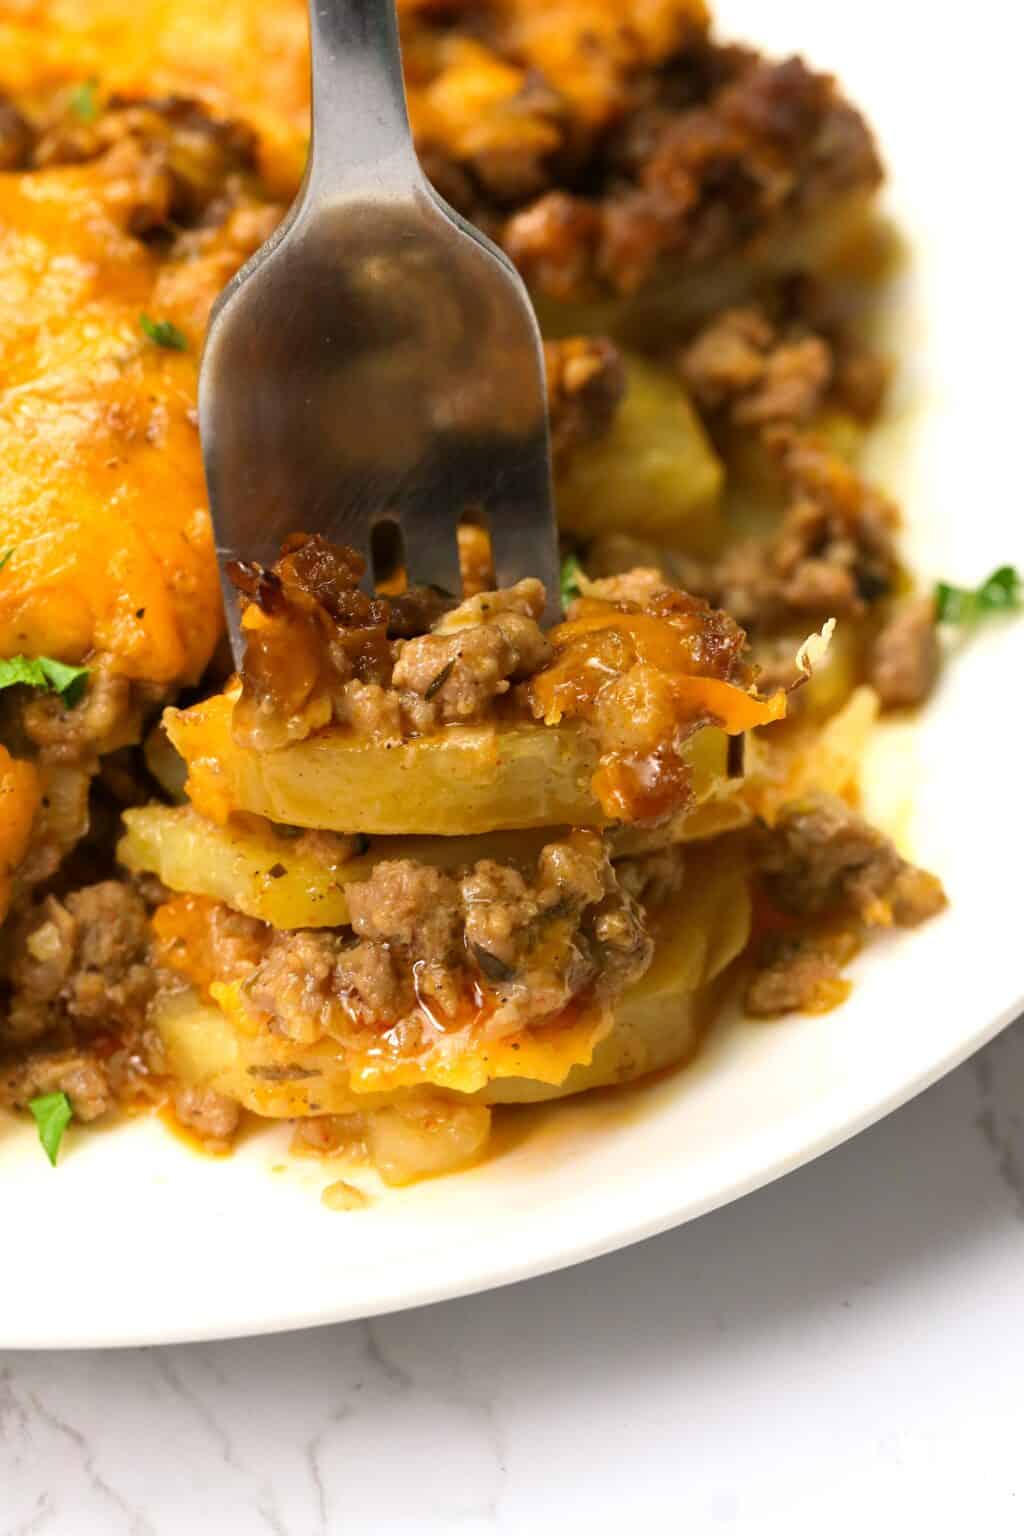 Ground Beef and Potato Casserole - Immaculate Bites